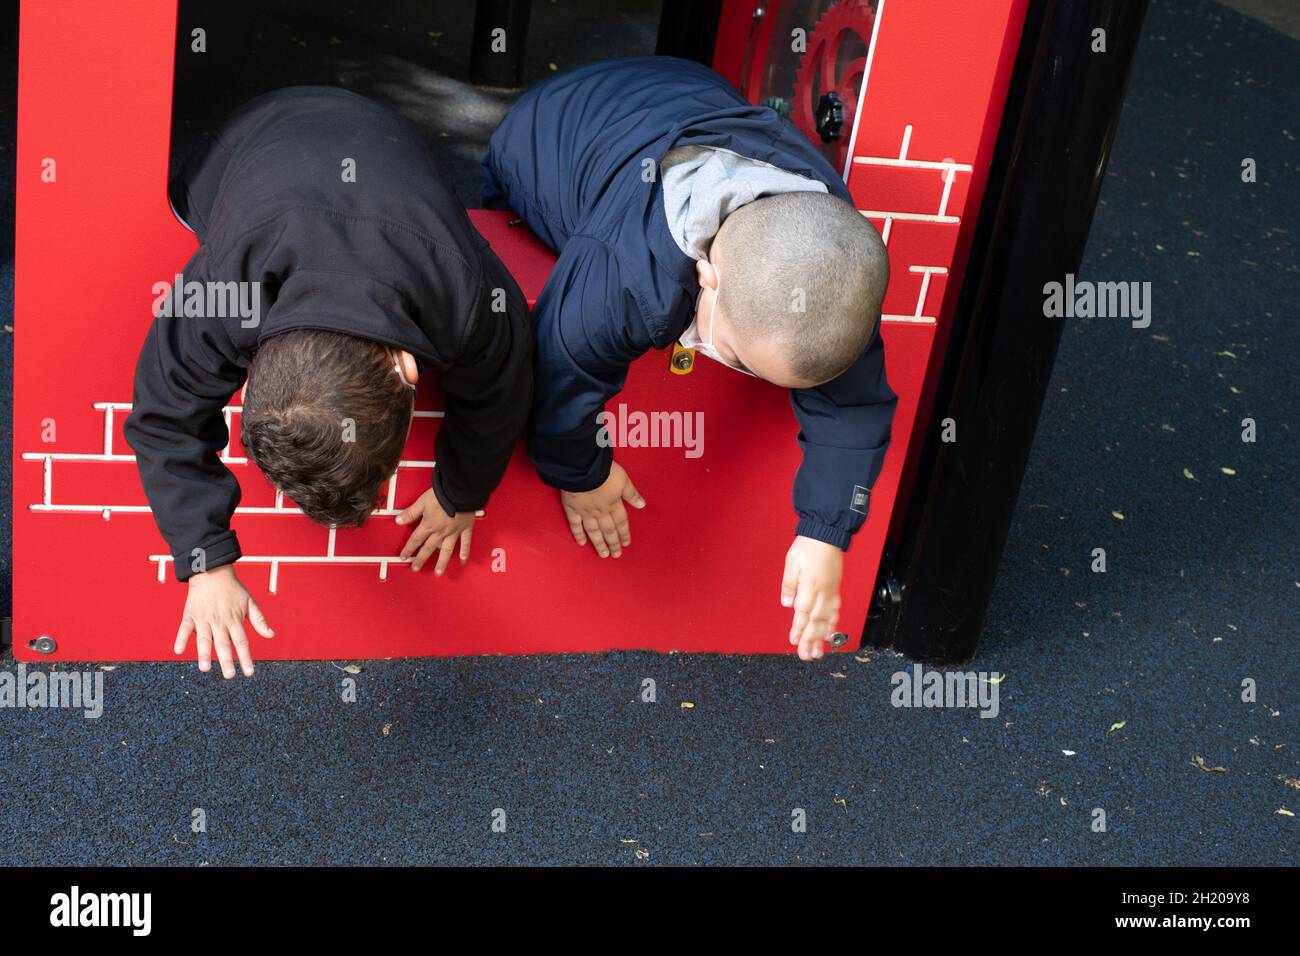 Education Preschool 3-4 year olds two boys leaning over edge of playground equipment to slap their hands on its surface Stock Photo